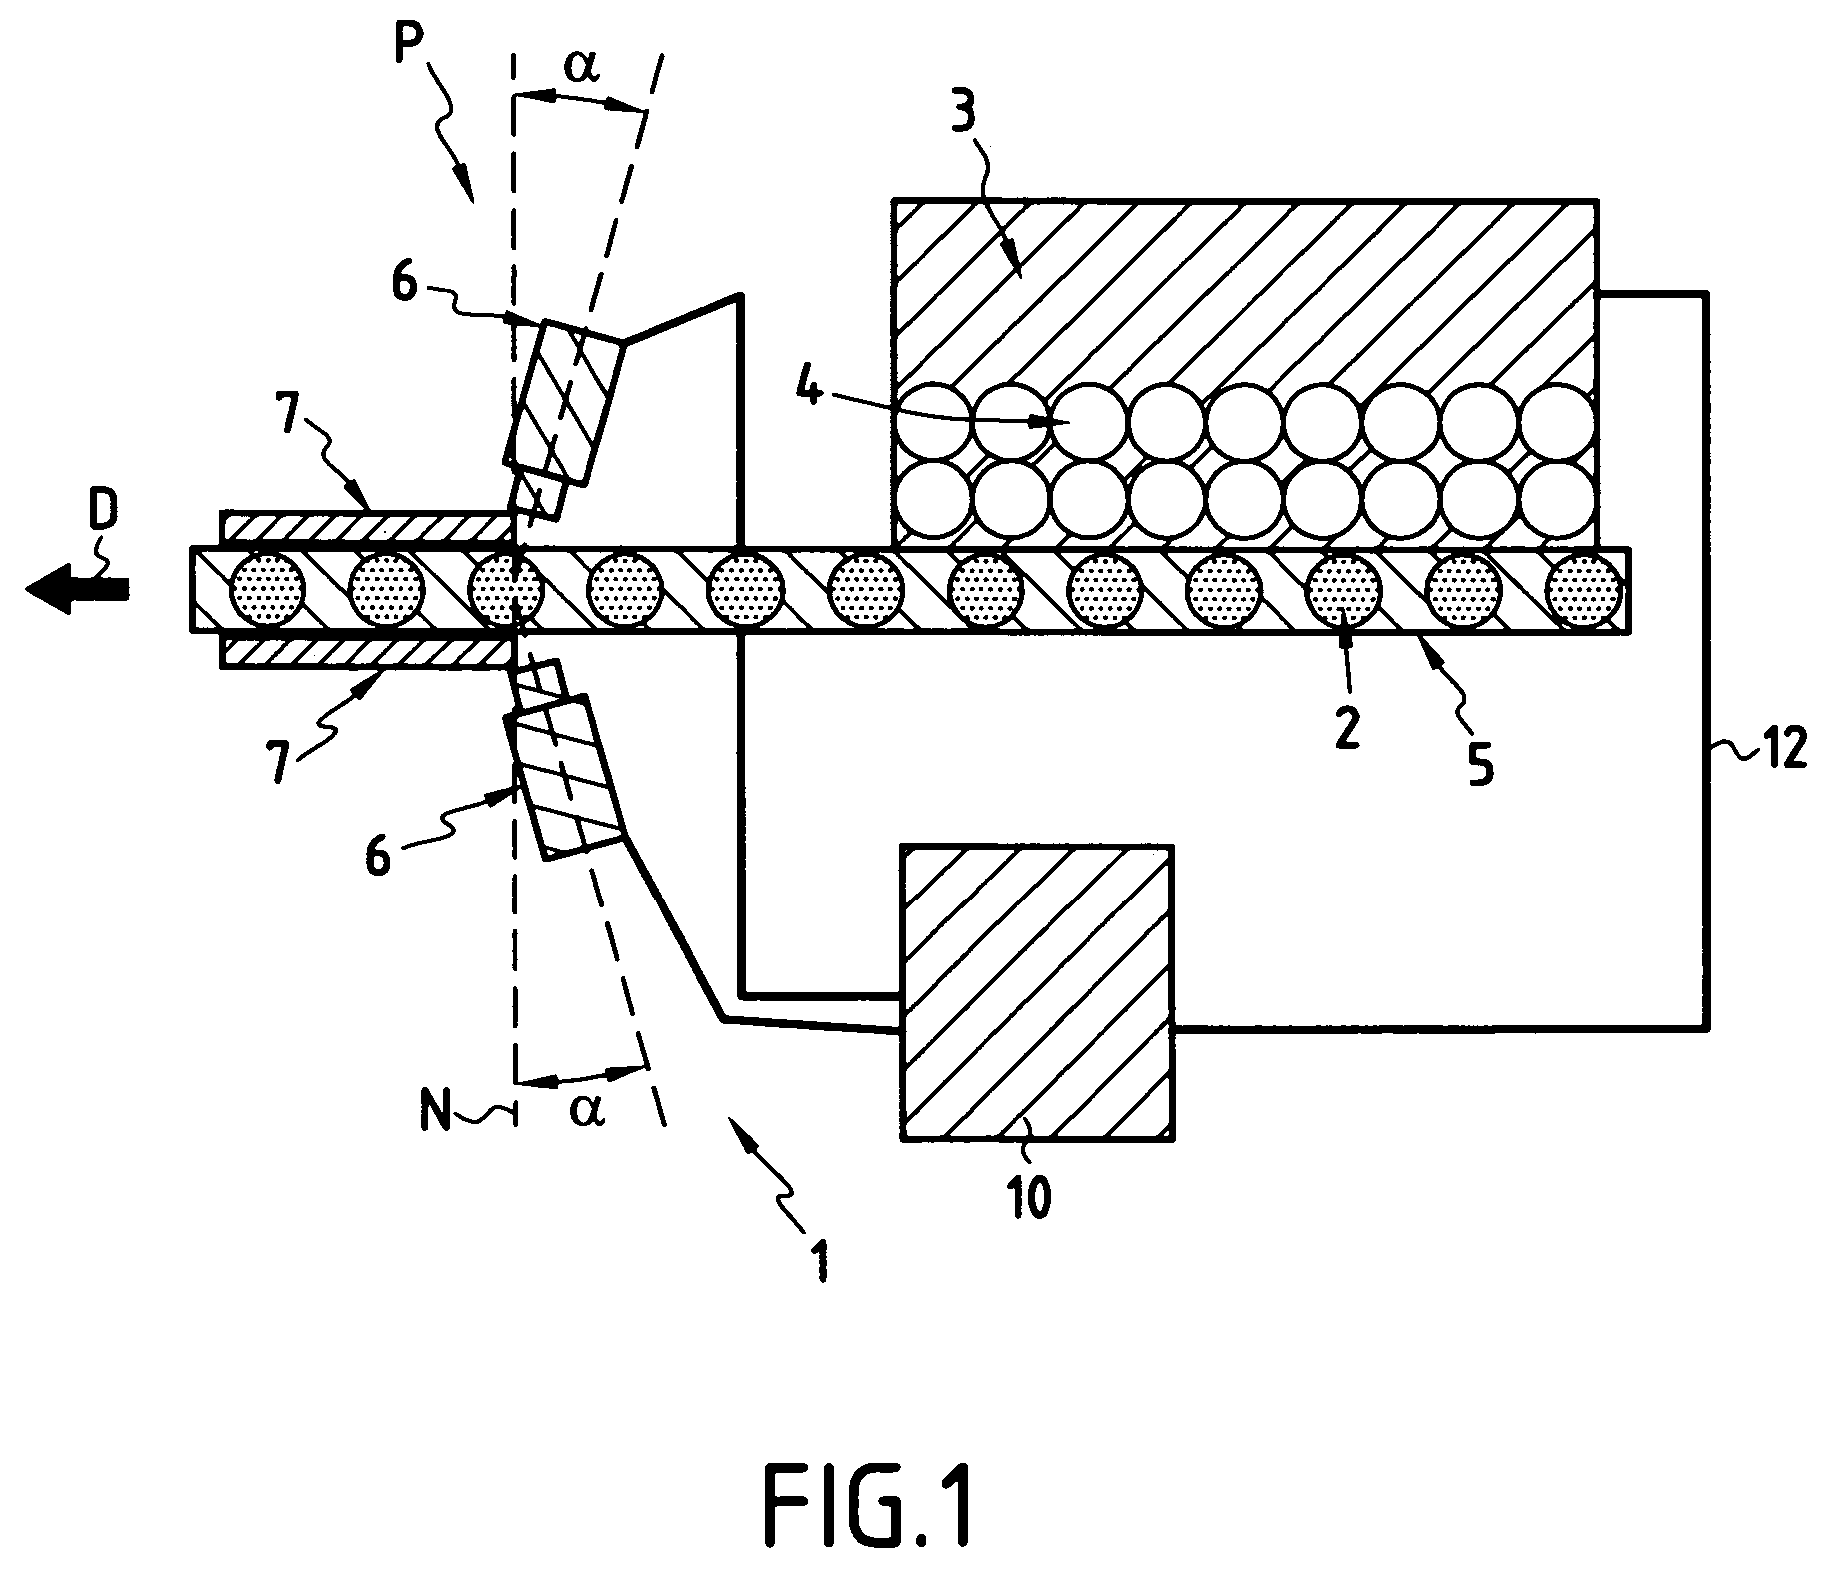 Method and apparatus for inspecting hot hollow articles that are translucent or transparent